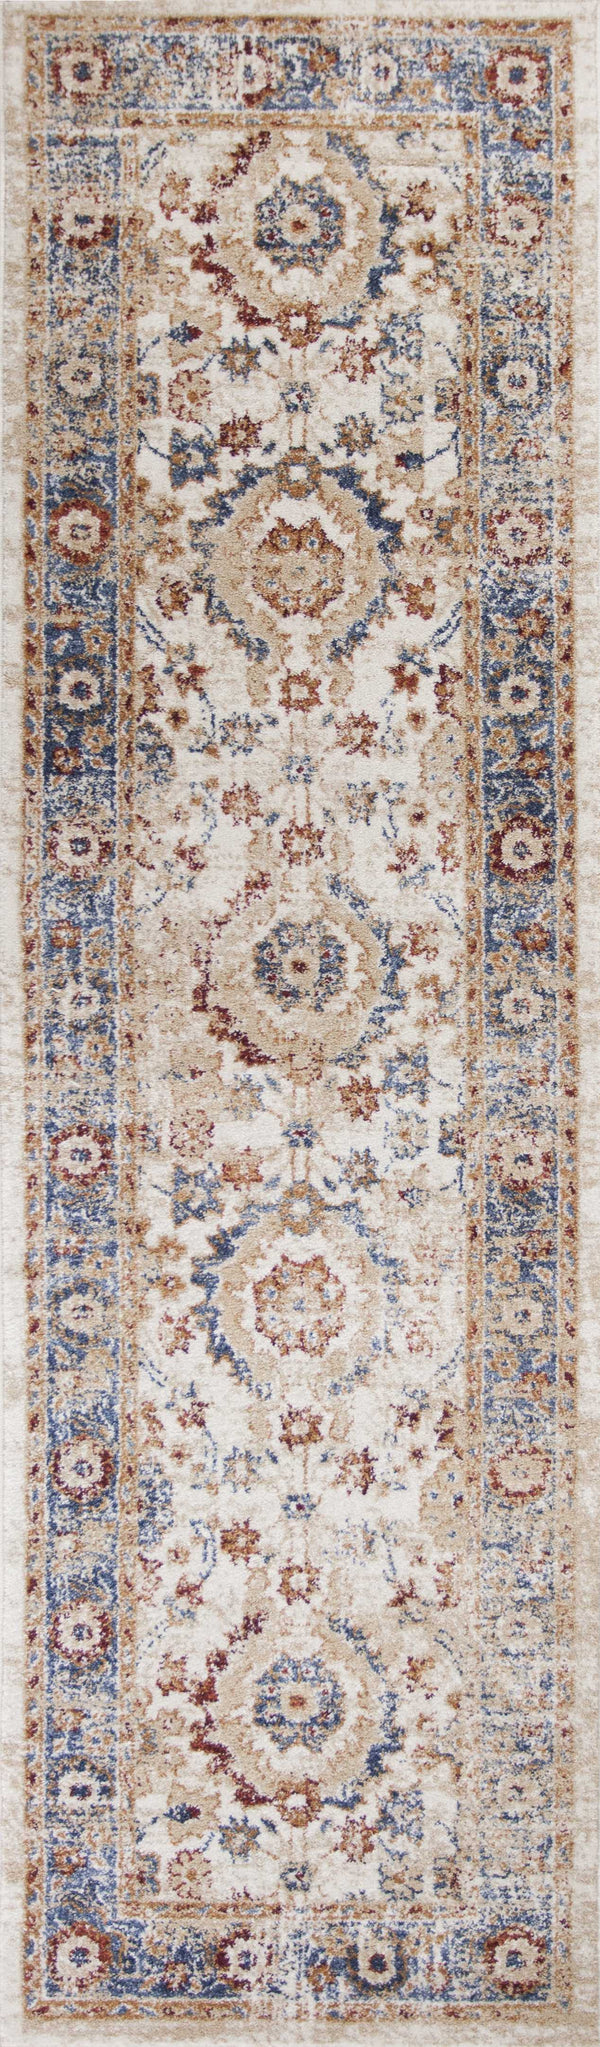 Rugs Cheap Rugs For Sale 26" X 90" X 0.'5" Ivory Polypropylene Rug 5322 HomeRoots